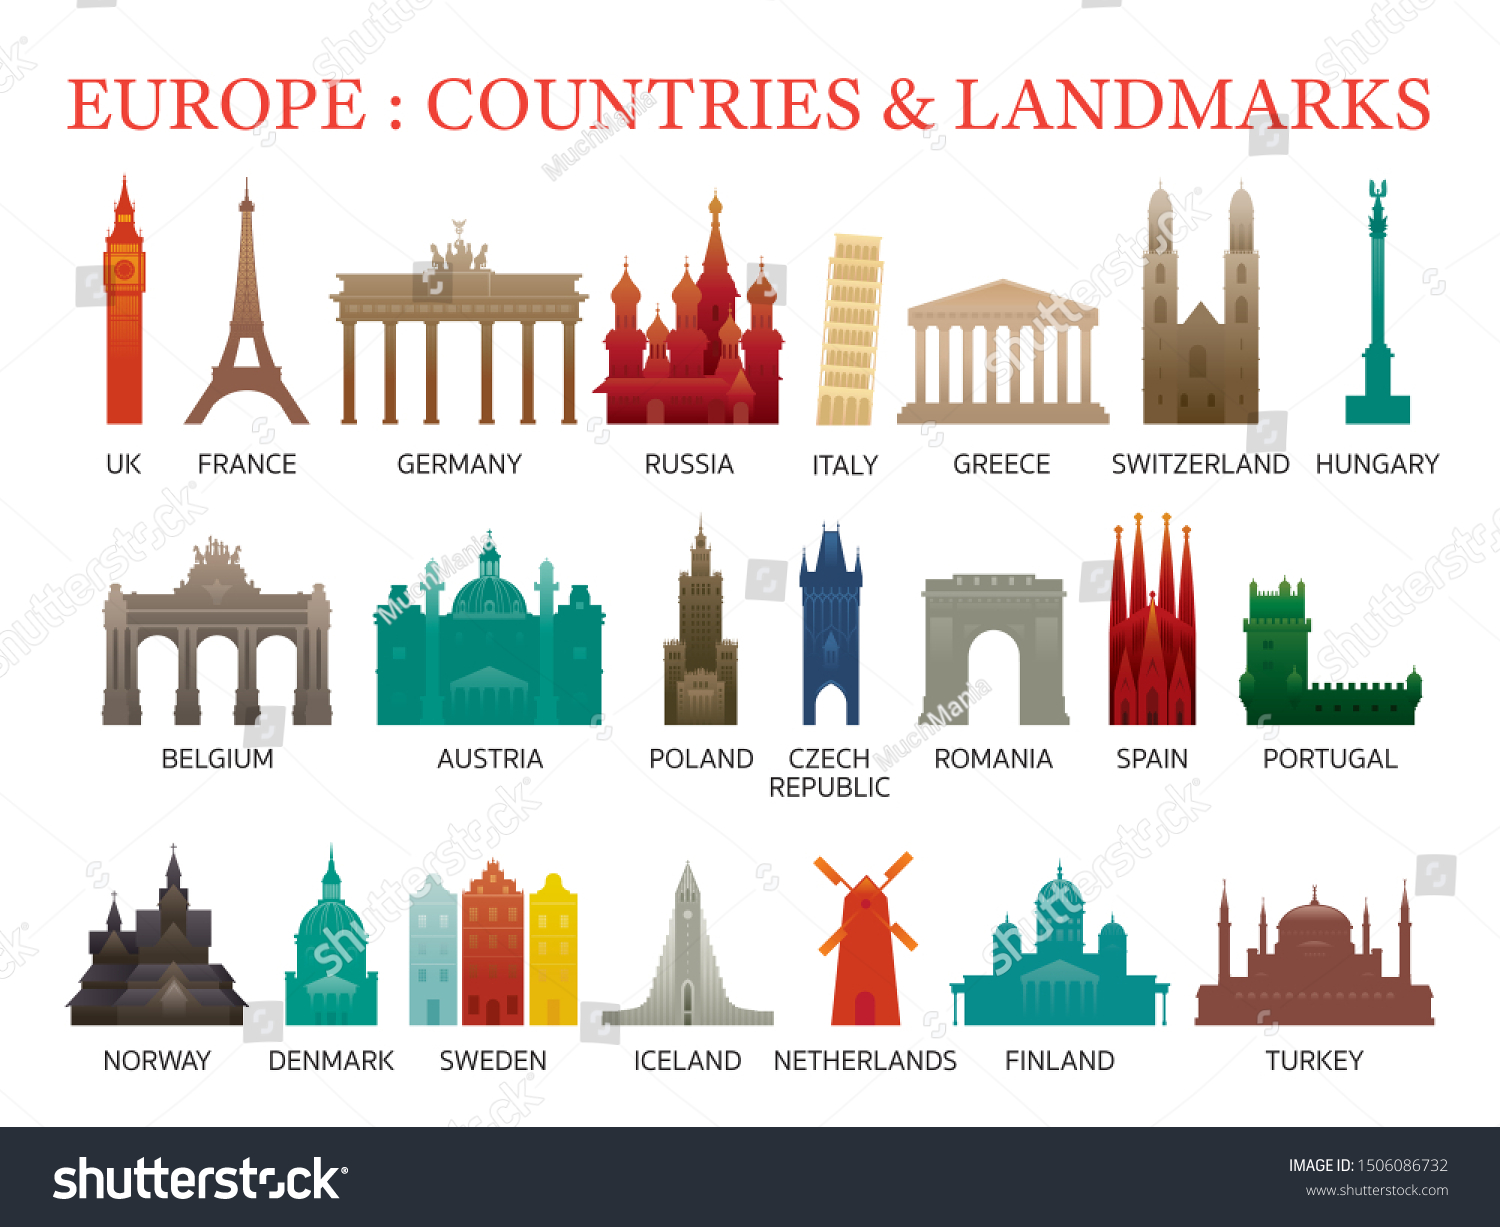 Europe Countries Landmarks Colorful Silhouette, Famous Place and Historical Buildings, Travel and Tourist Attraction #1506086732